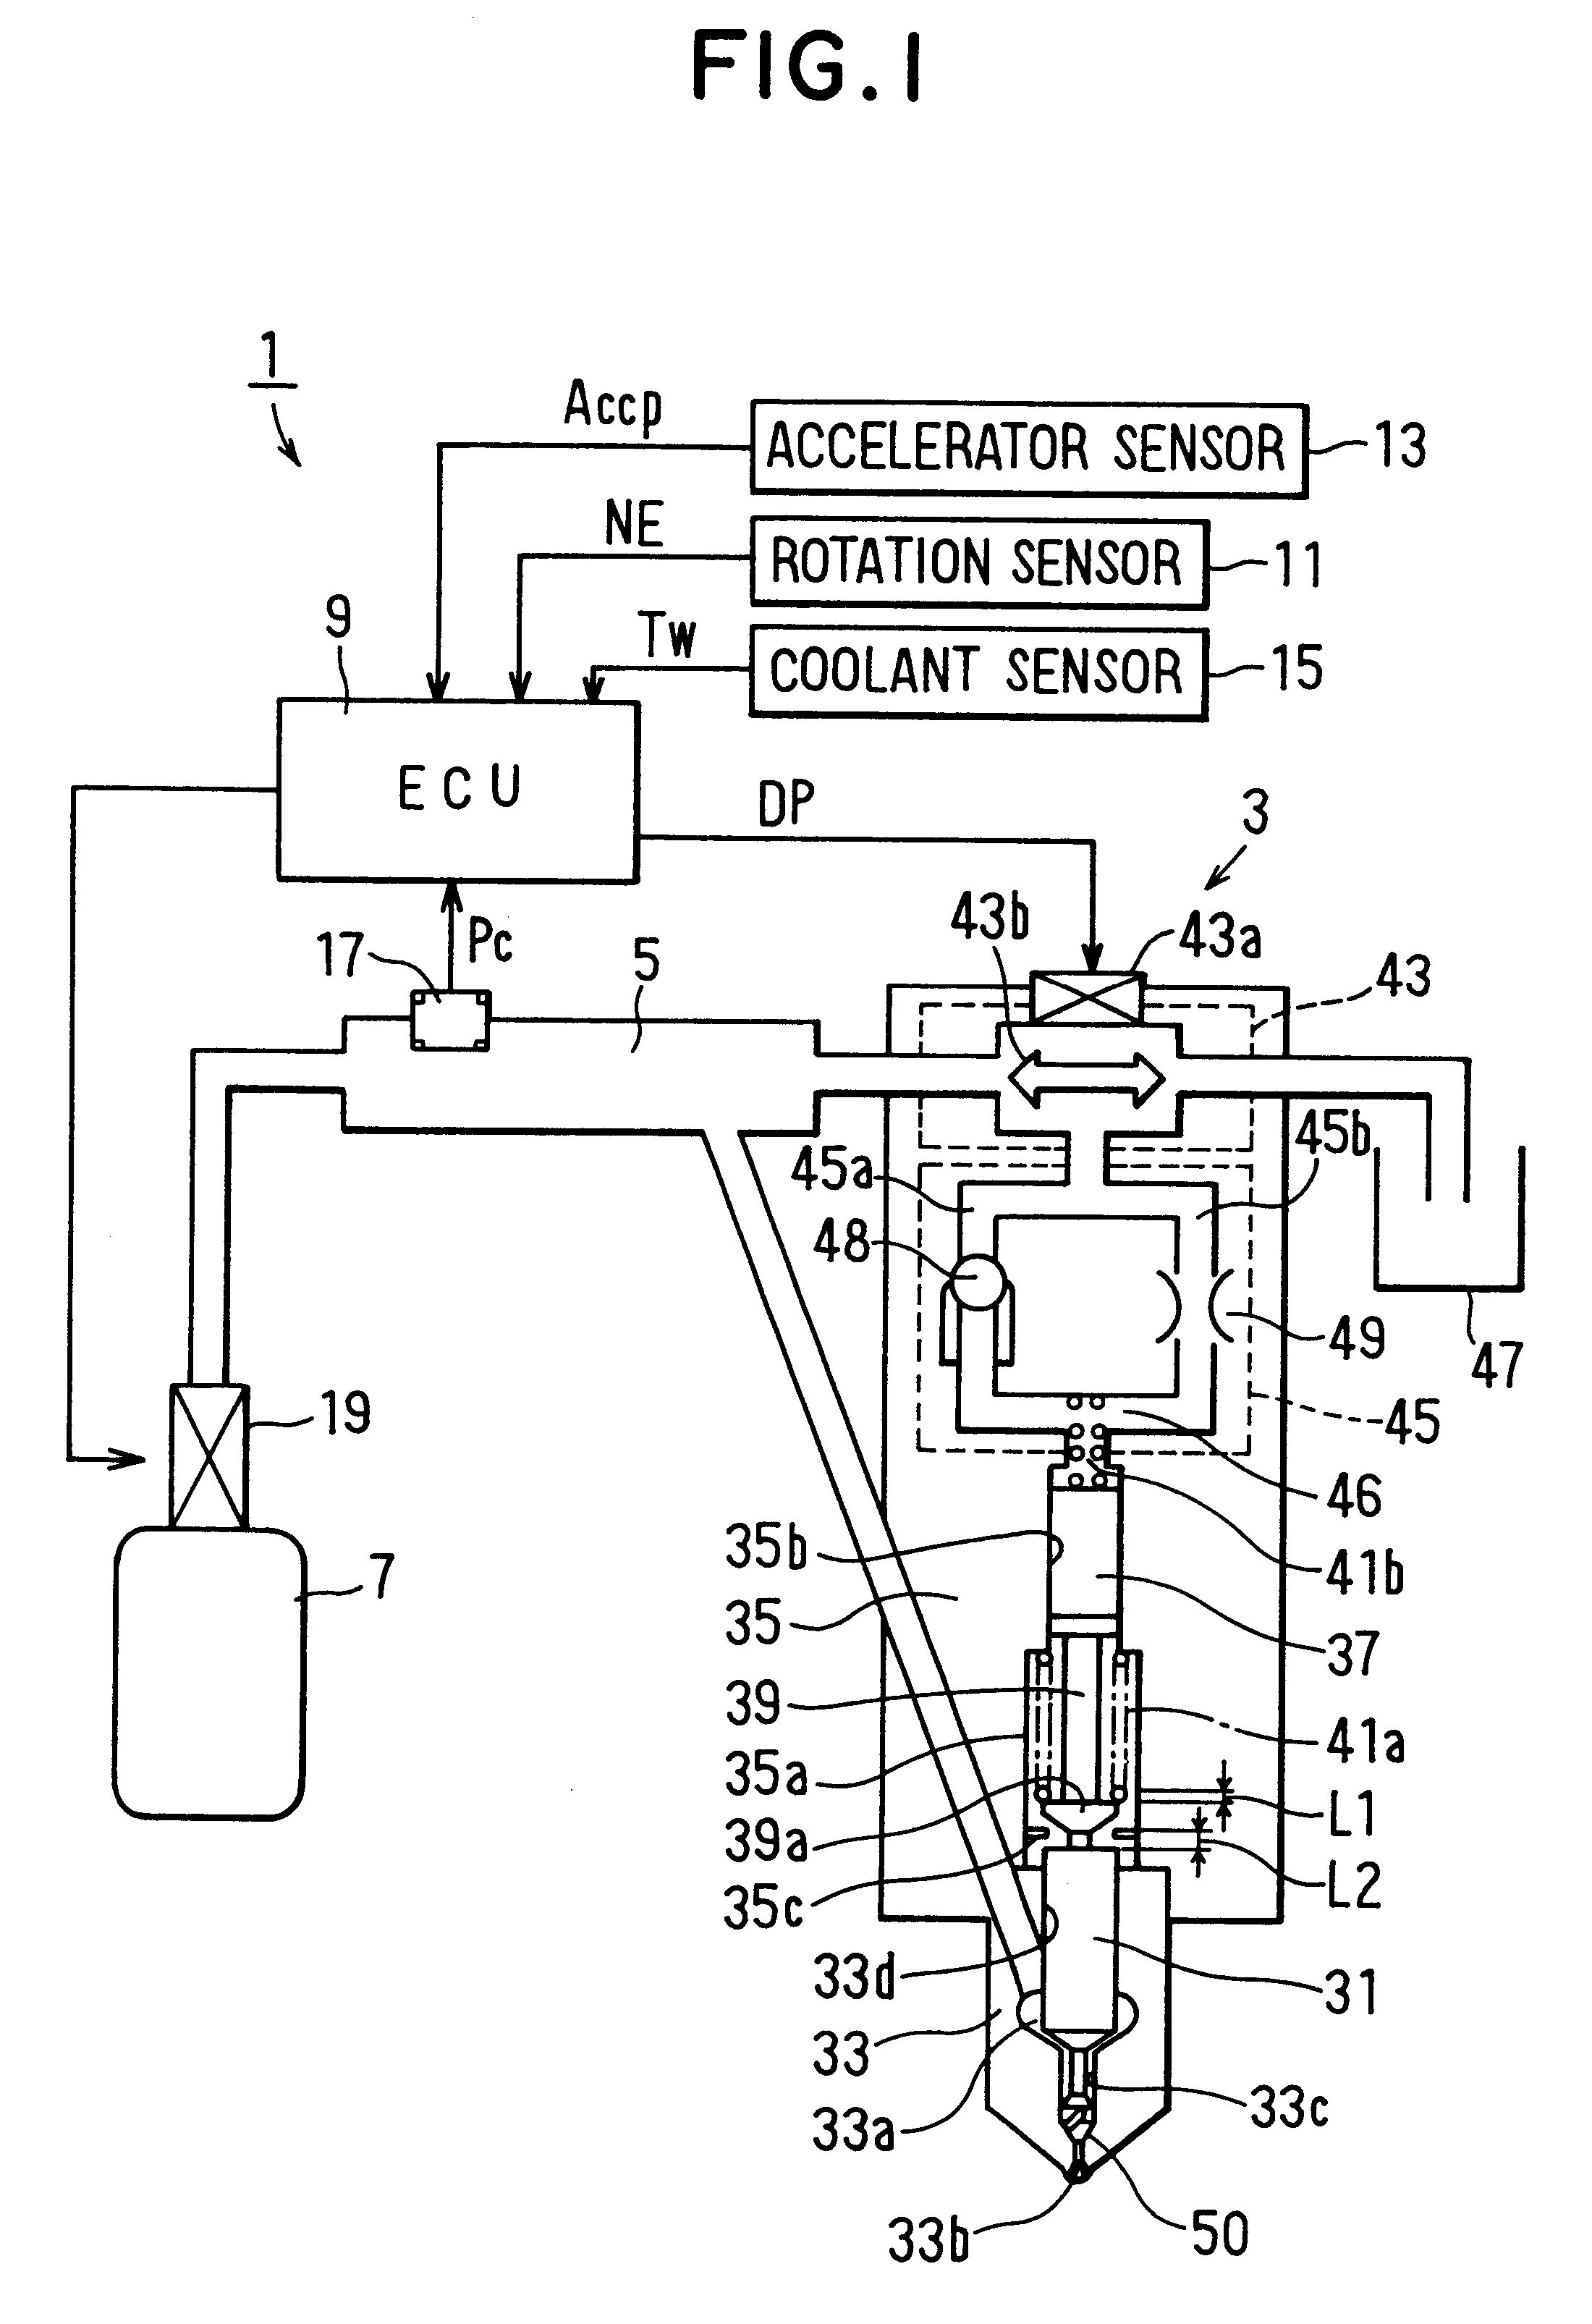 Fuel injection system having pre-injection and main injection